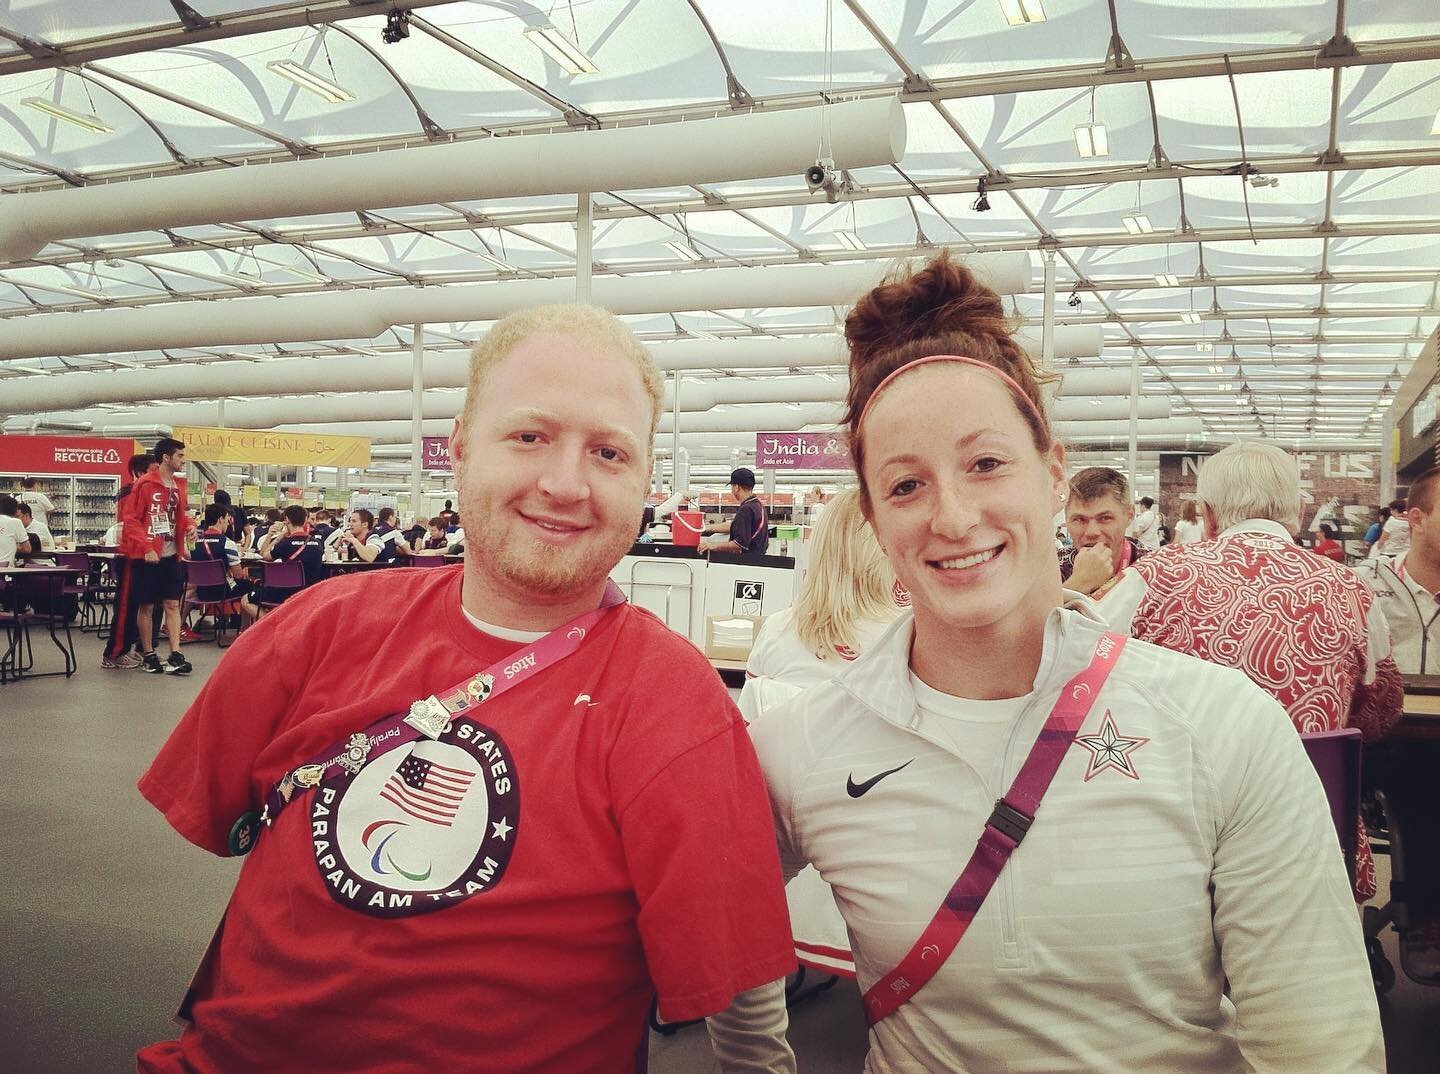 Just little pea pods at the London @paralympics !!! This is the wonderful Matt Stutzman aka the @armless_archer who was featured in the film #risingphoenix @htyt.stories . But did you know that he also has a Guinness world record for the longest accu